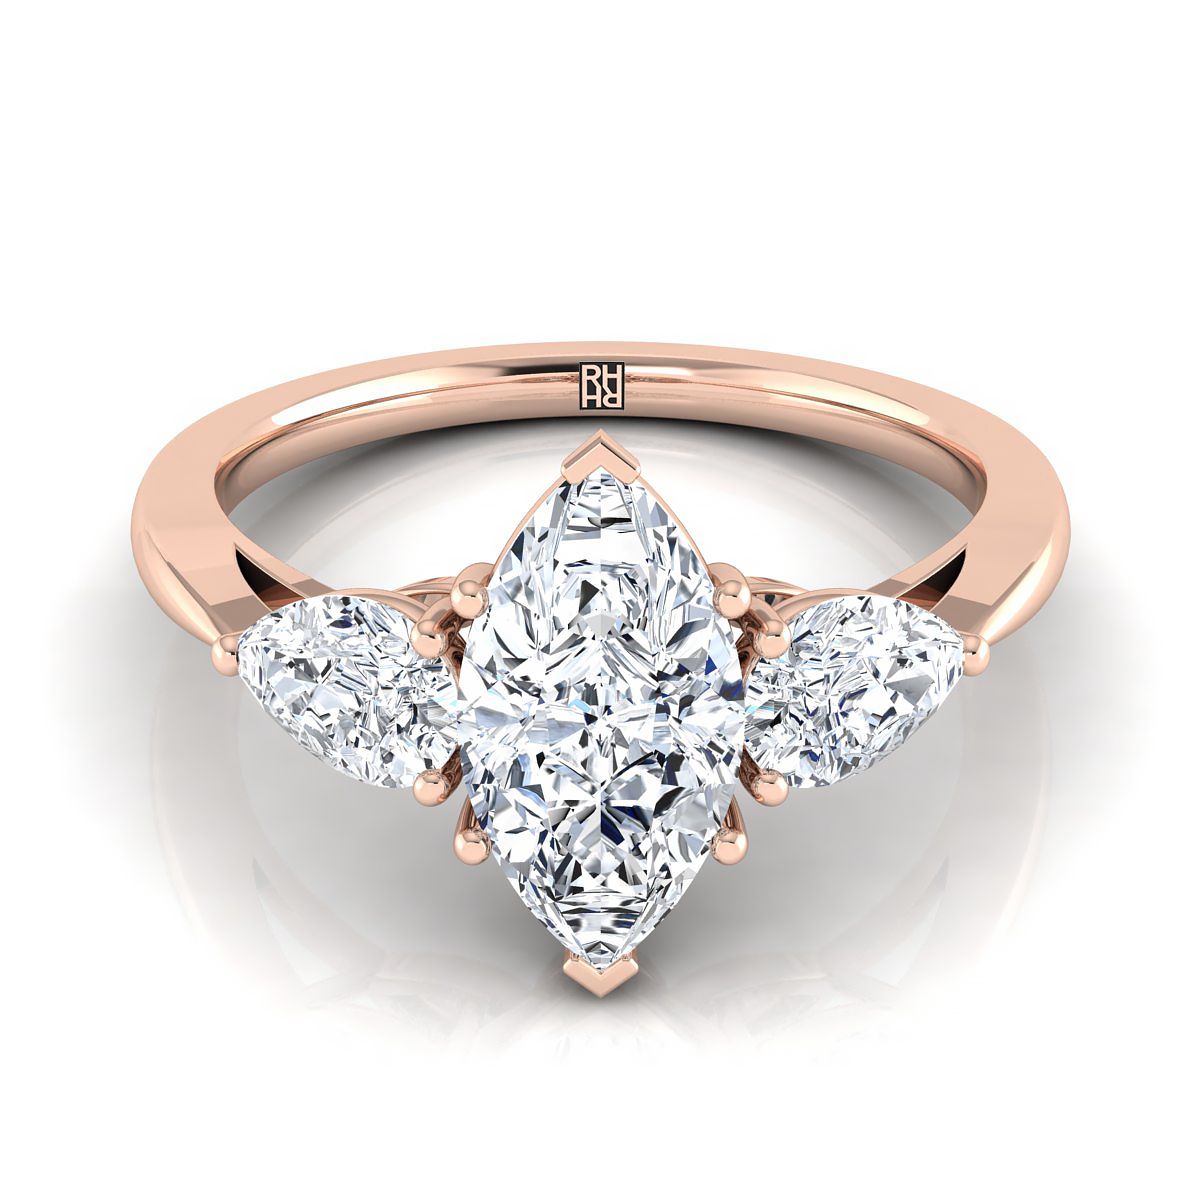 14K Rose Gold Marquise  Diamond Perfectly Matched Pear Shaped Three Diamond Engagement Ring -7/8ctw